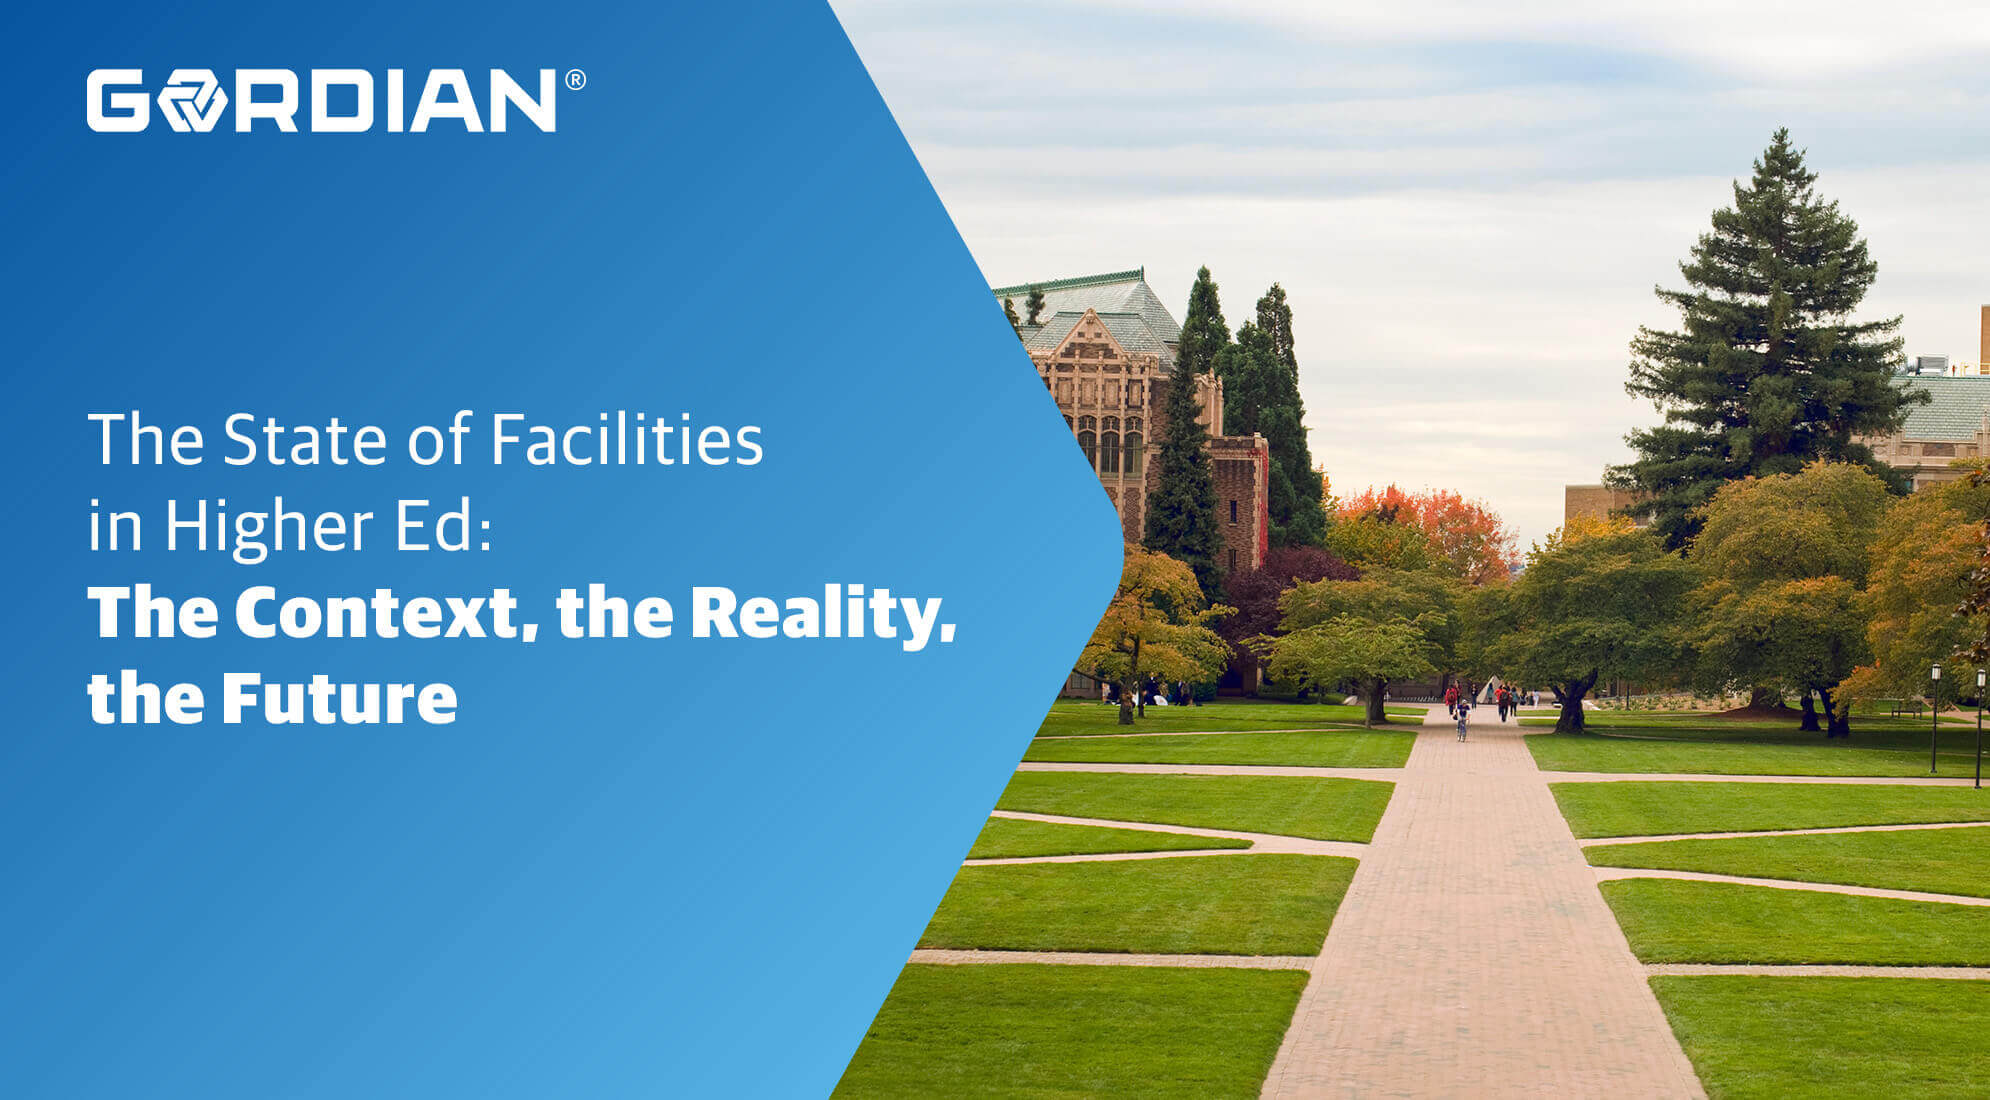 The State of Facilities in Higher Ed - The Context, the Reality, the Future 1